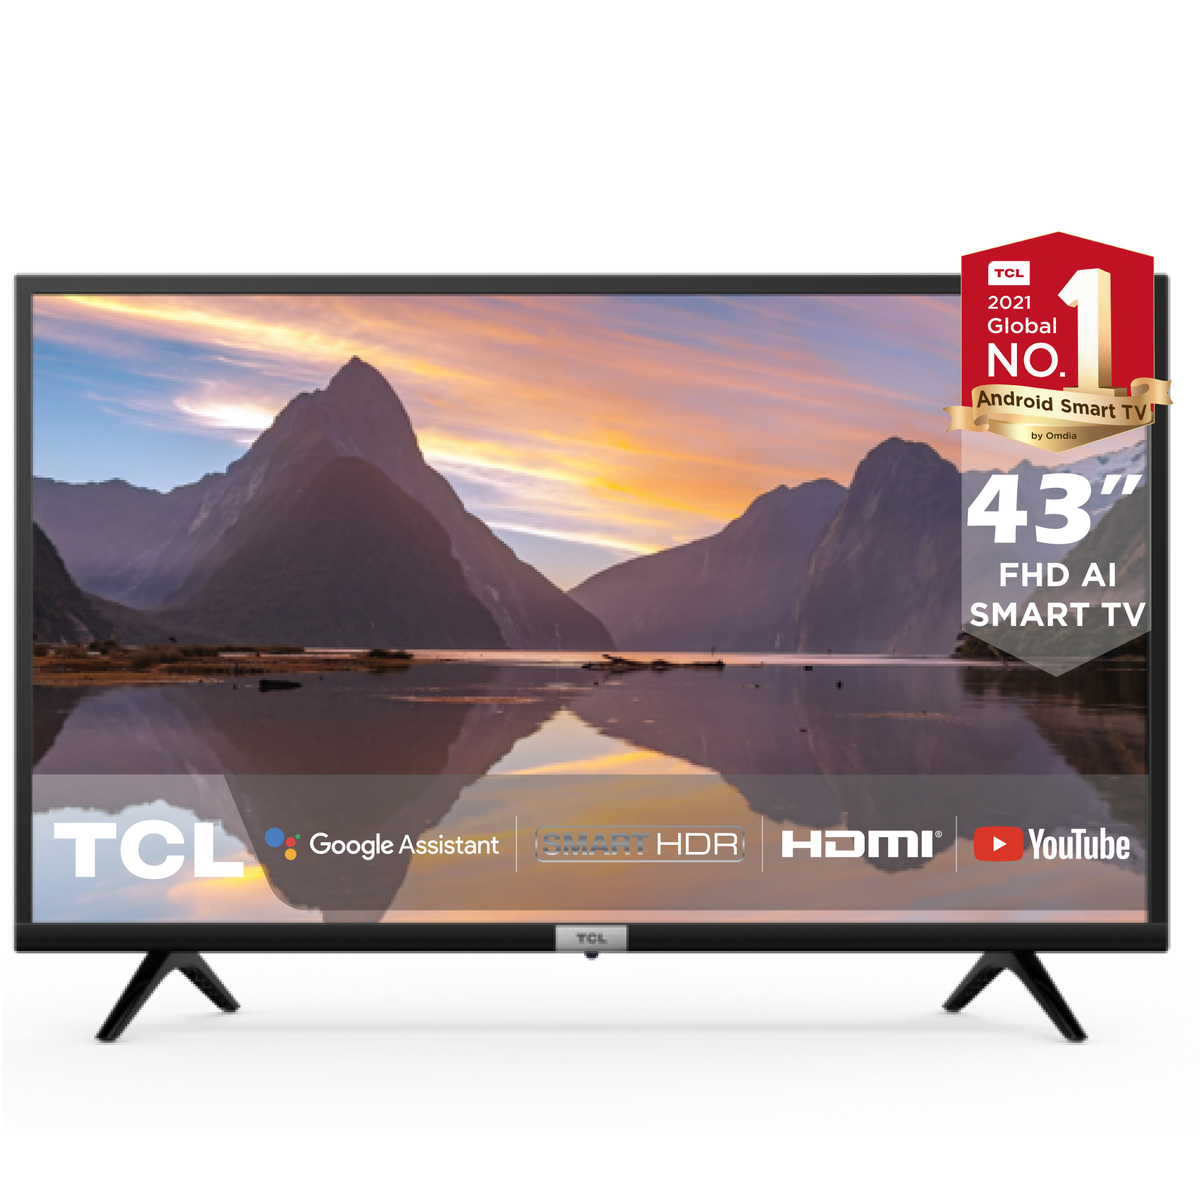 TCL 43 Inches Android Smart Full HD LED TV, 43S5200